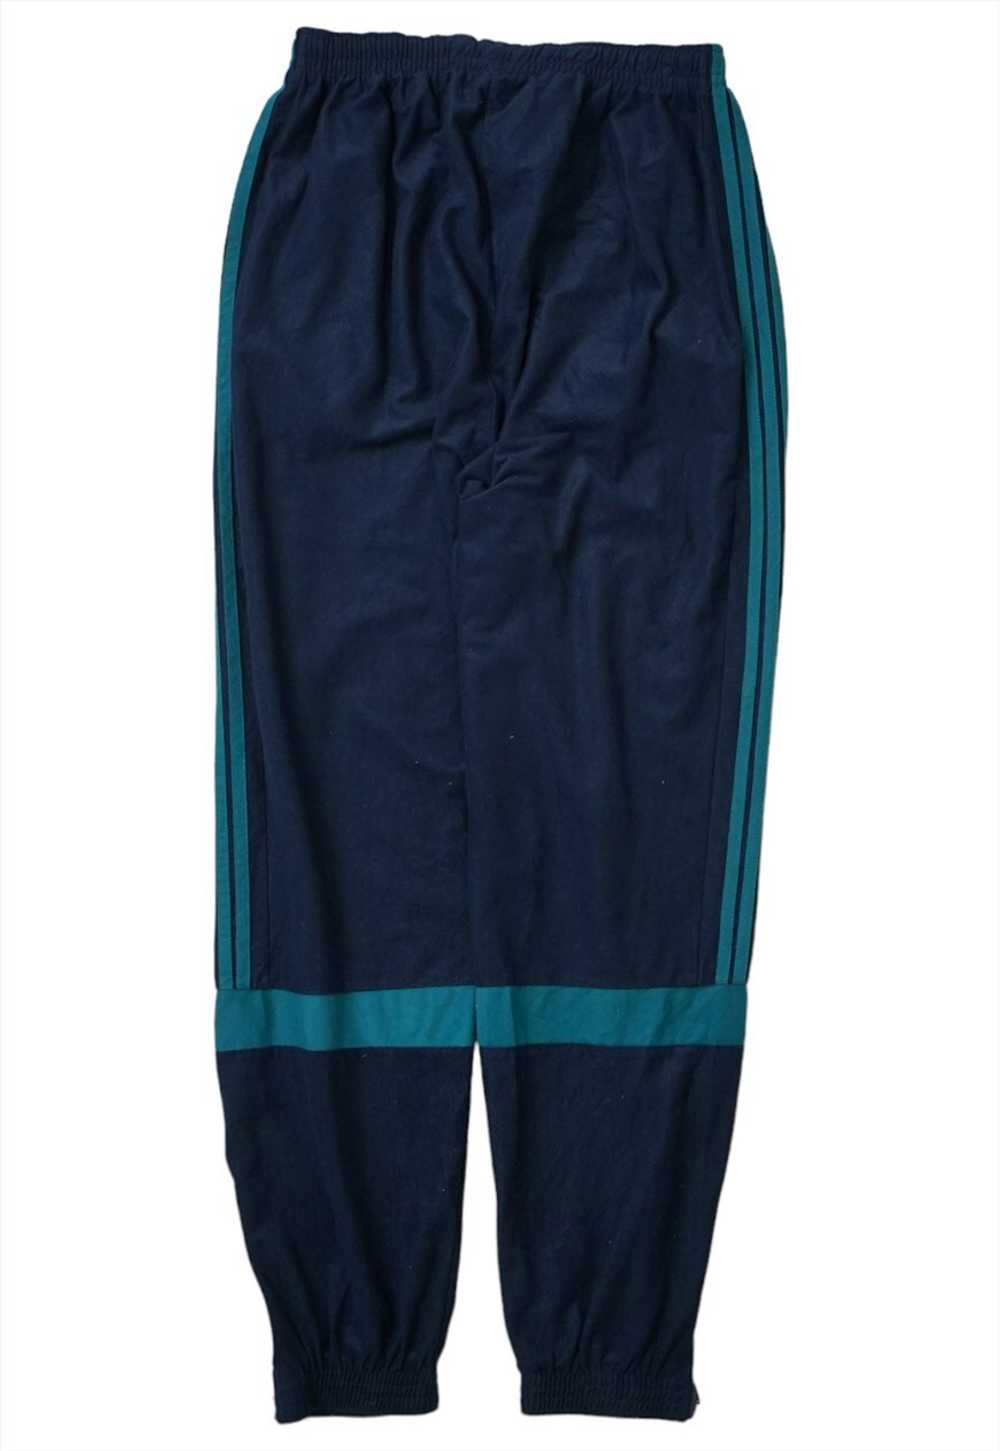 Vintage Adidas 80s Navy Tracksuit Bottoms Womens - image 2